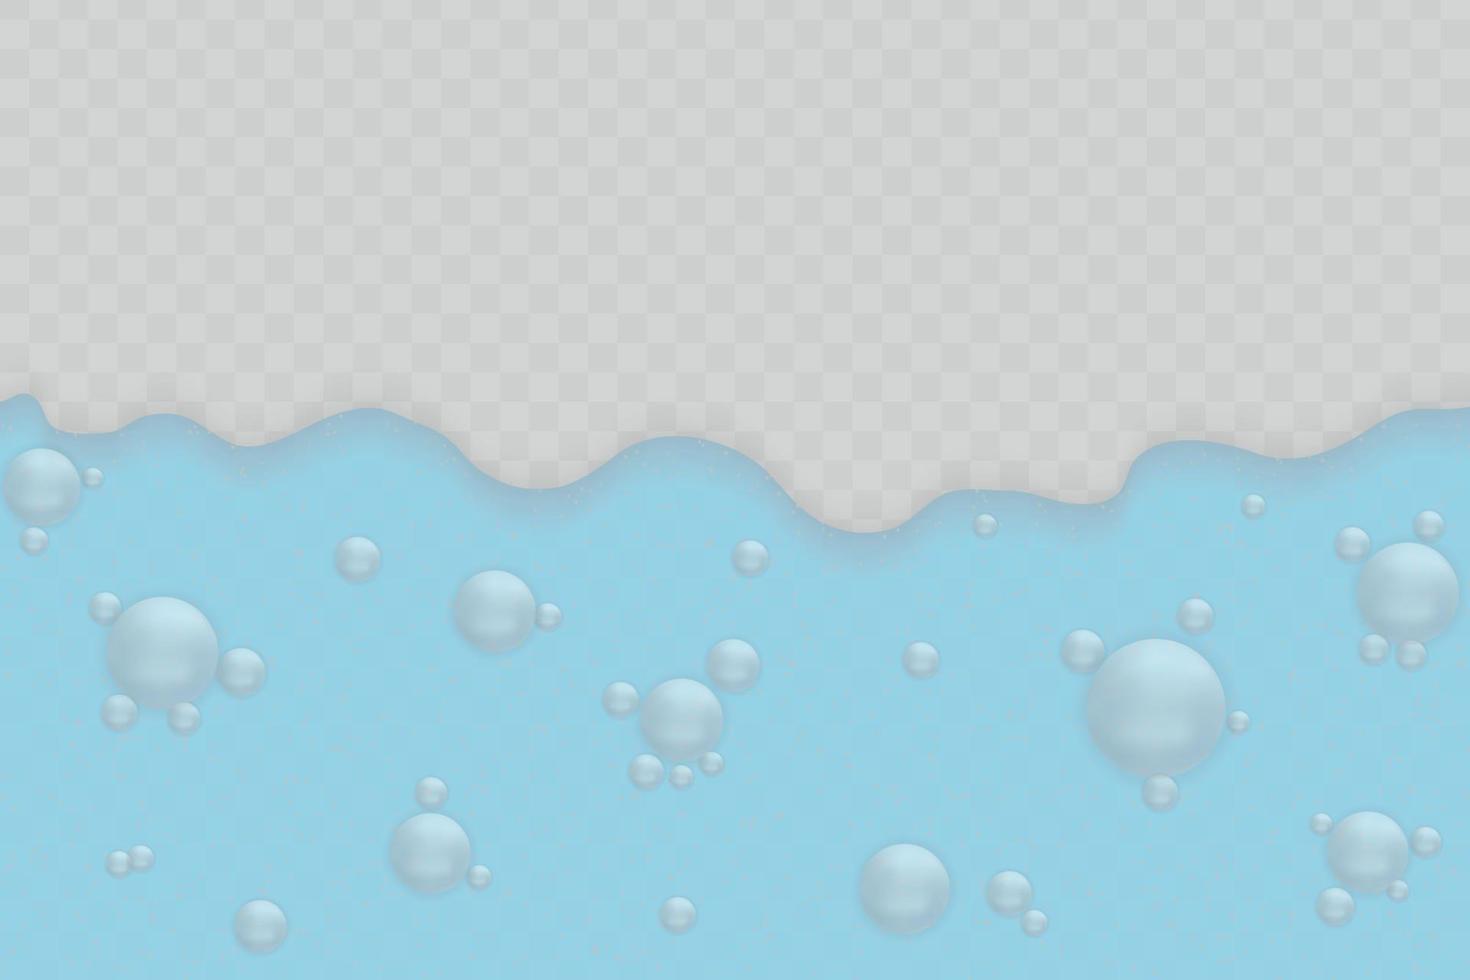 Foam background with bubbles vector